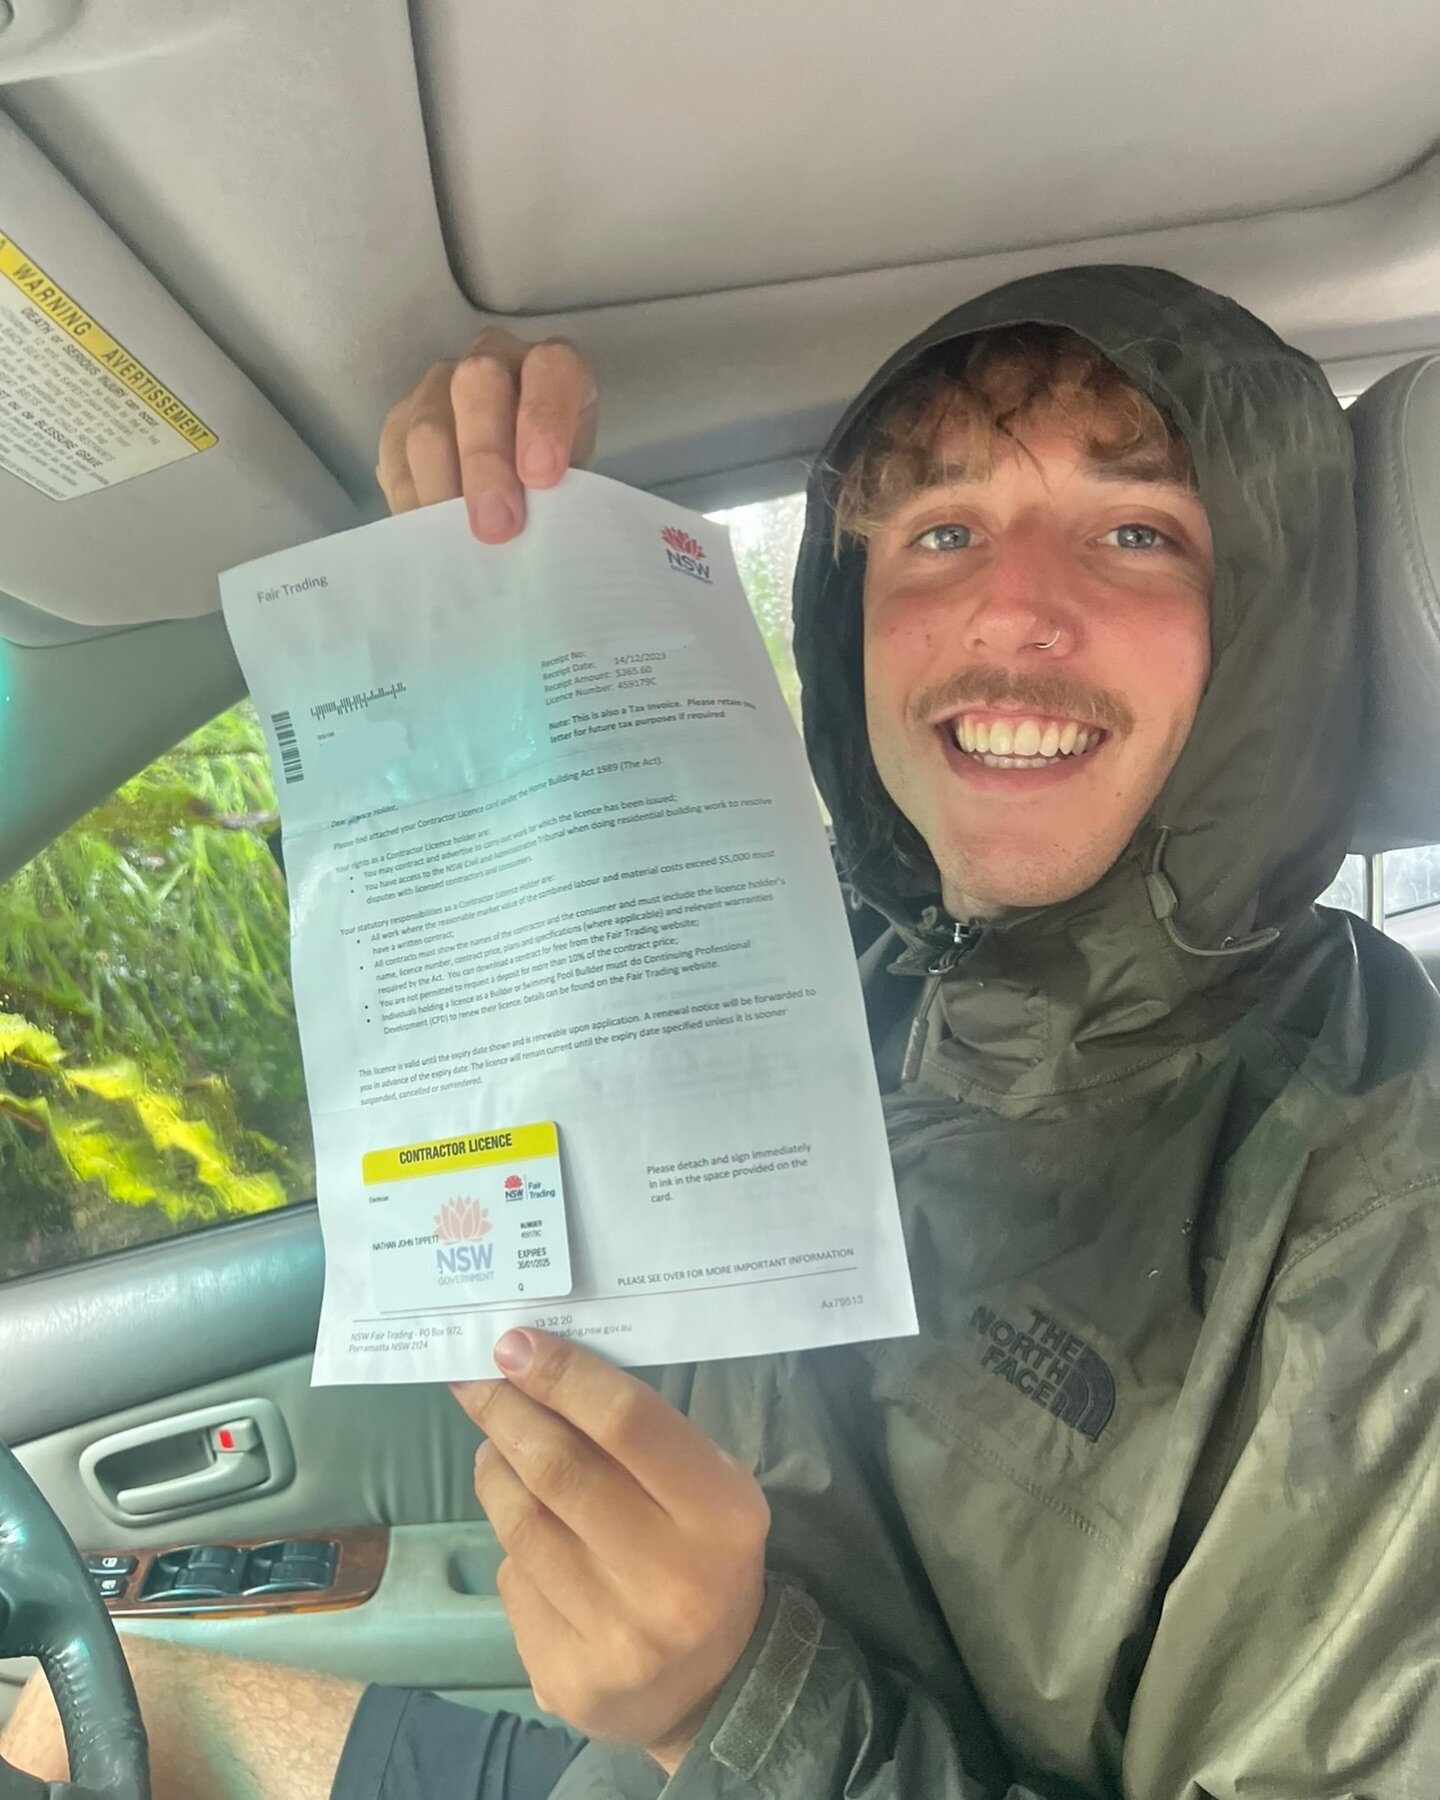 The team&rsquo;s &ldquo;favourite son&rdquo; has received his Electrical Licence and we could not be more proud! A massive congratulations to one of HALLMAC&rsquo;s originals. Good on you Tippett!
&bull;
&bull;
&bull;
#hallmacelectrical #electricalco